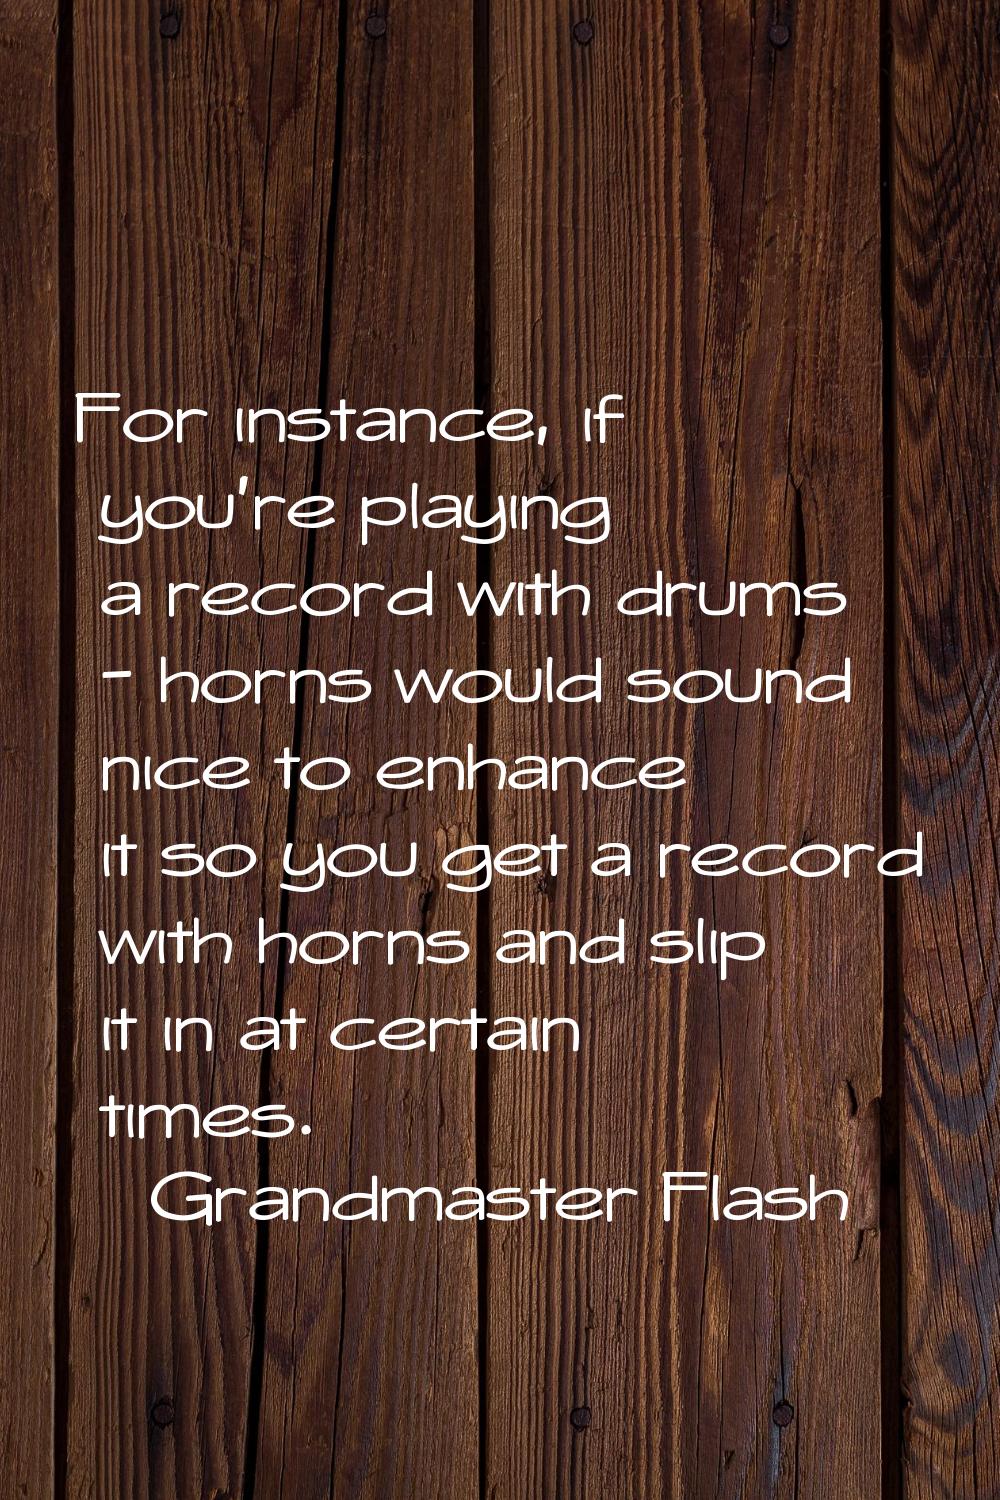 For instance, if you're playing a record with drums - horns would sound nice to enhance it so you g